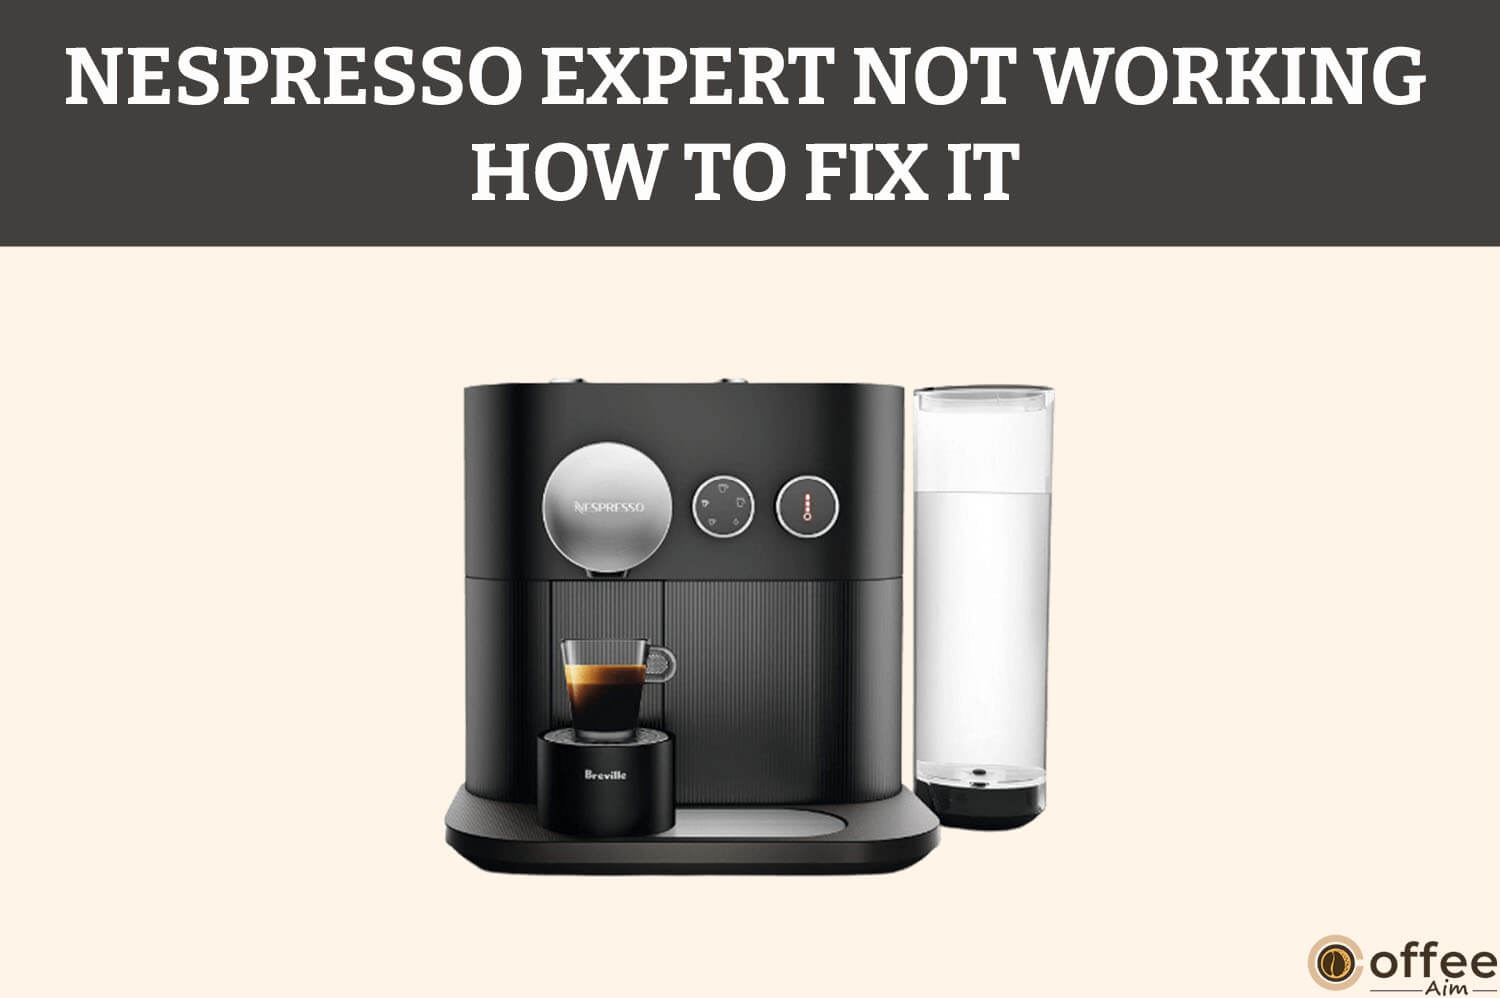 Featured image for the article "Nespresso Expert Not Working How to Fix It"